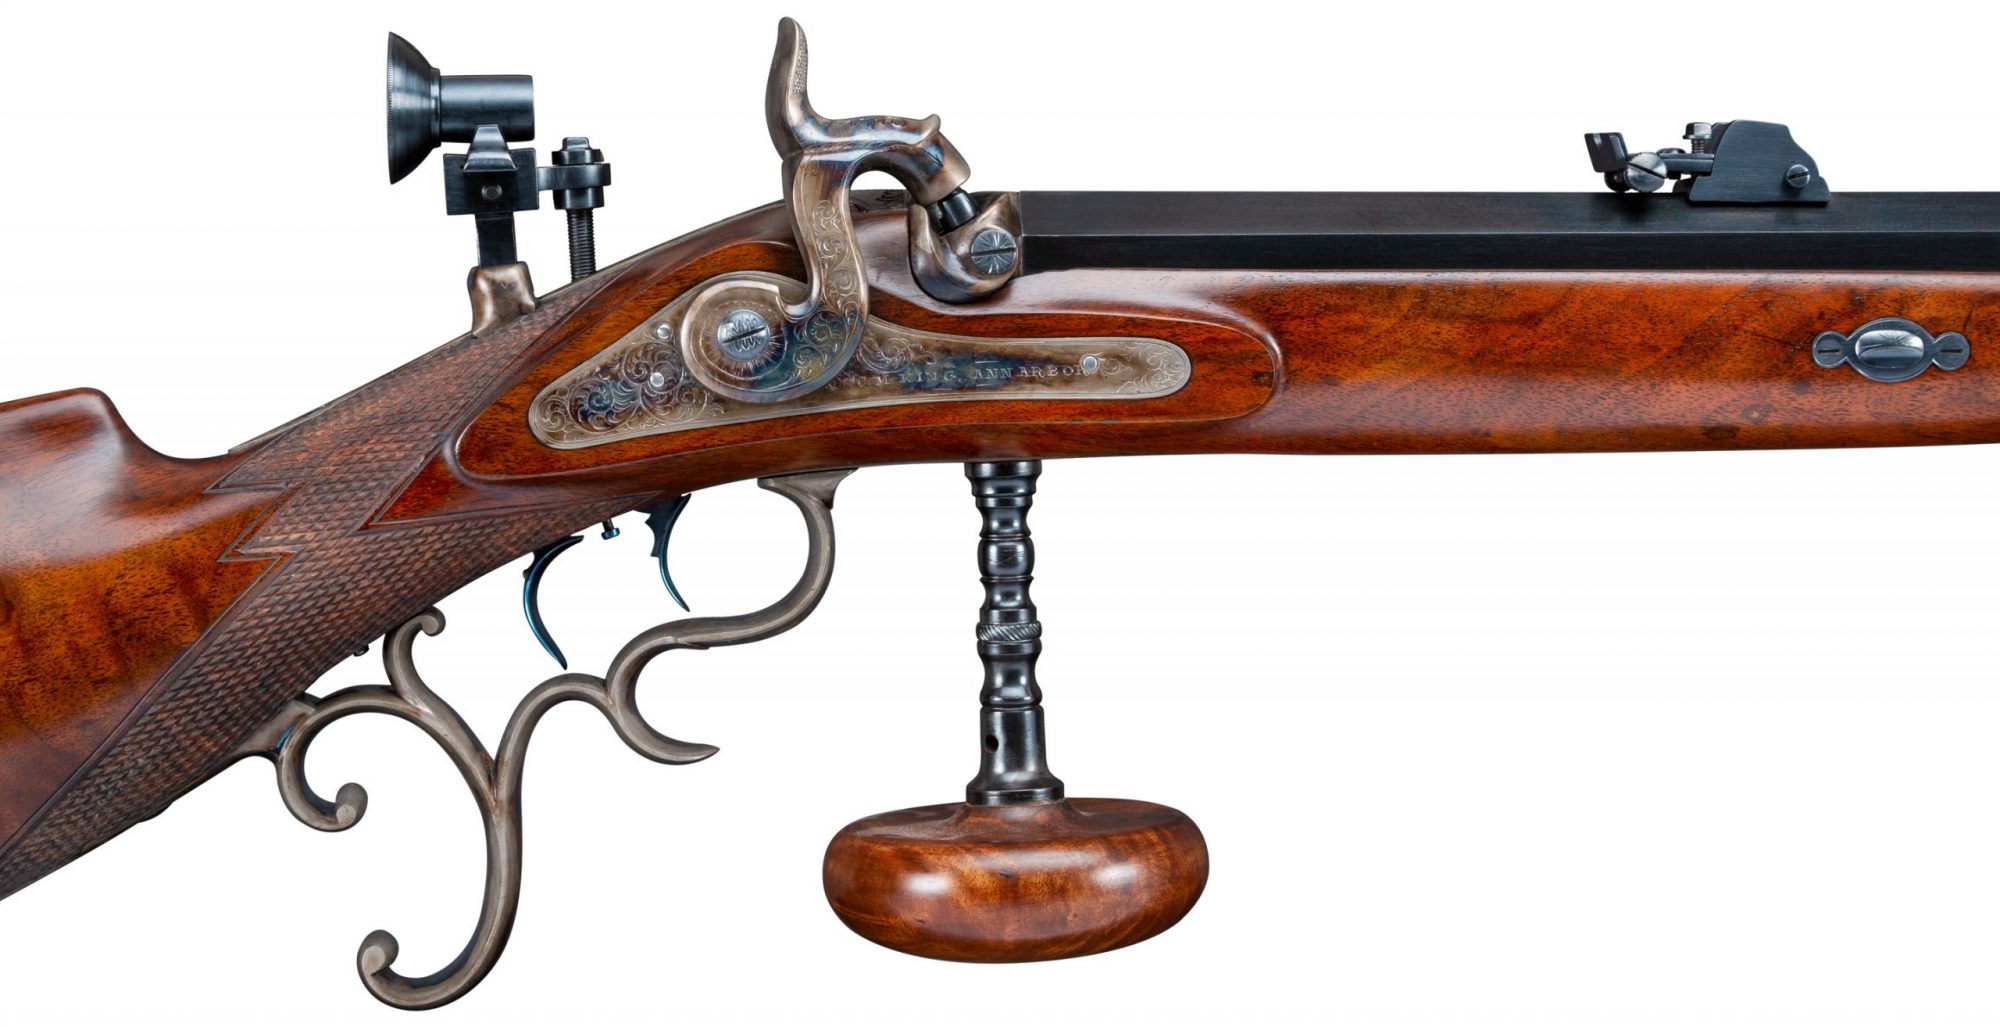 Photo of Germanic-themed percussion Schuetzen rifle, after restoration by Turnbull Restoration Co.